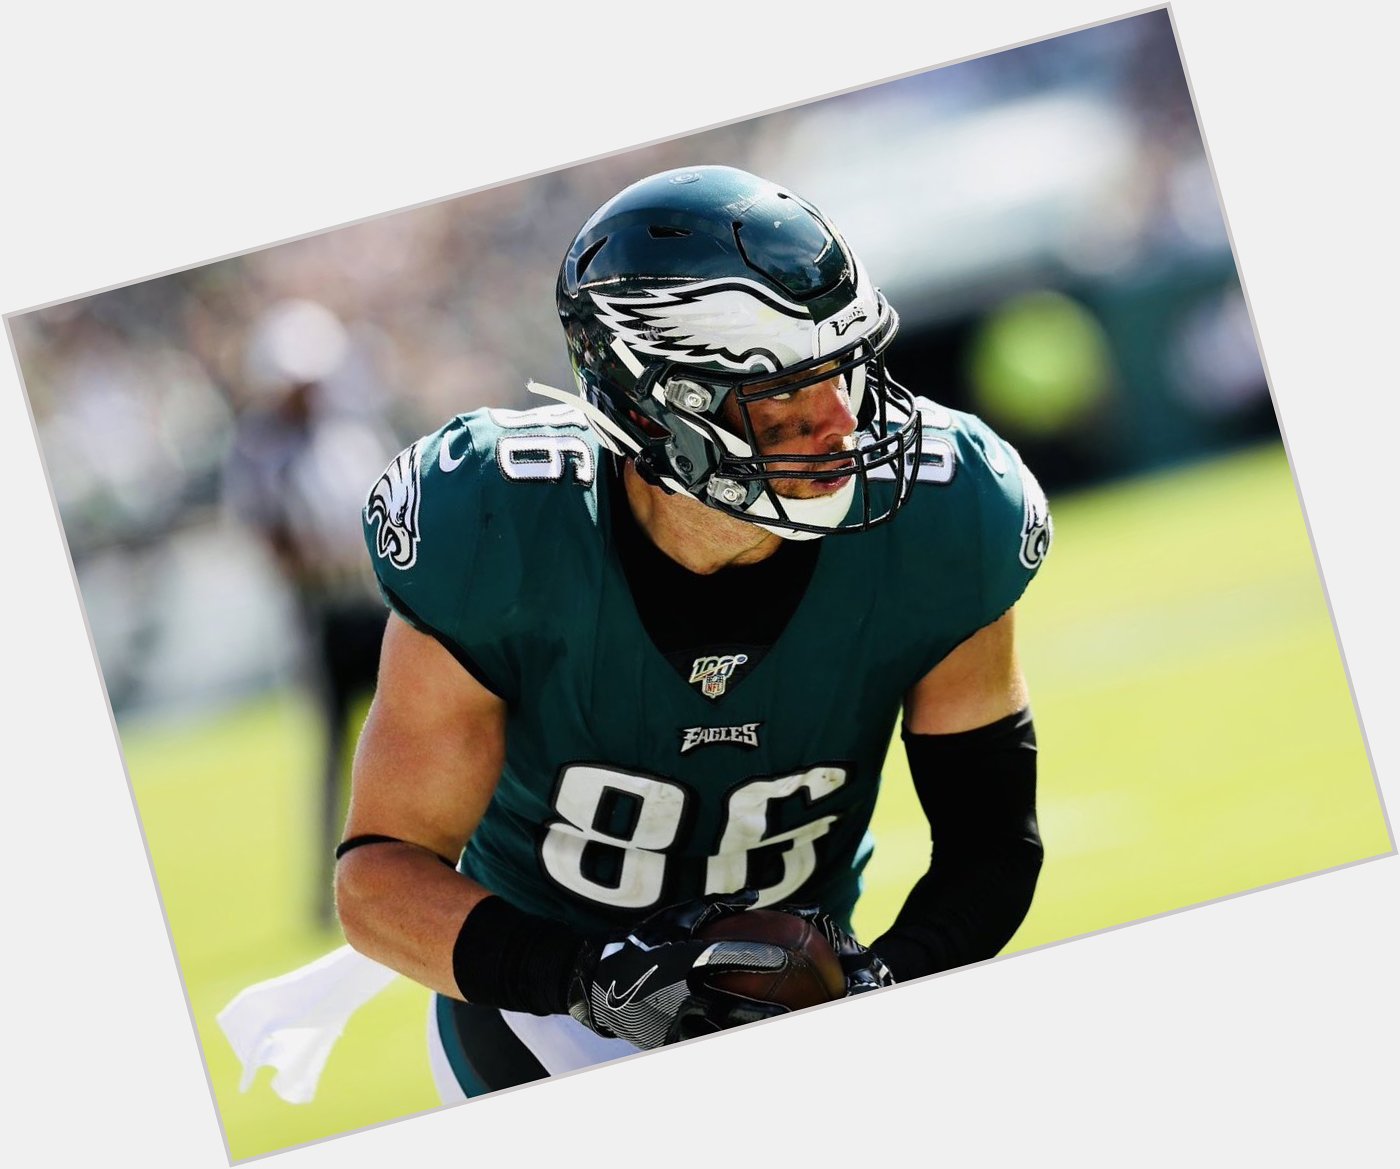 Happy birthday to the best tight end in football, Zach Ertz. 